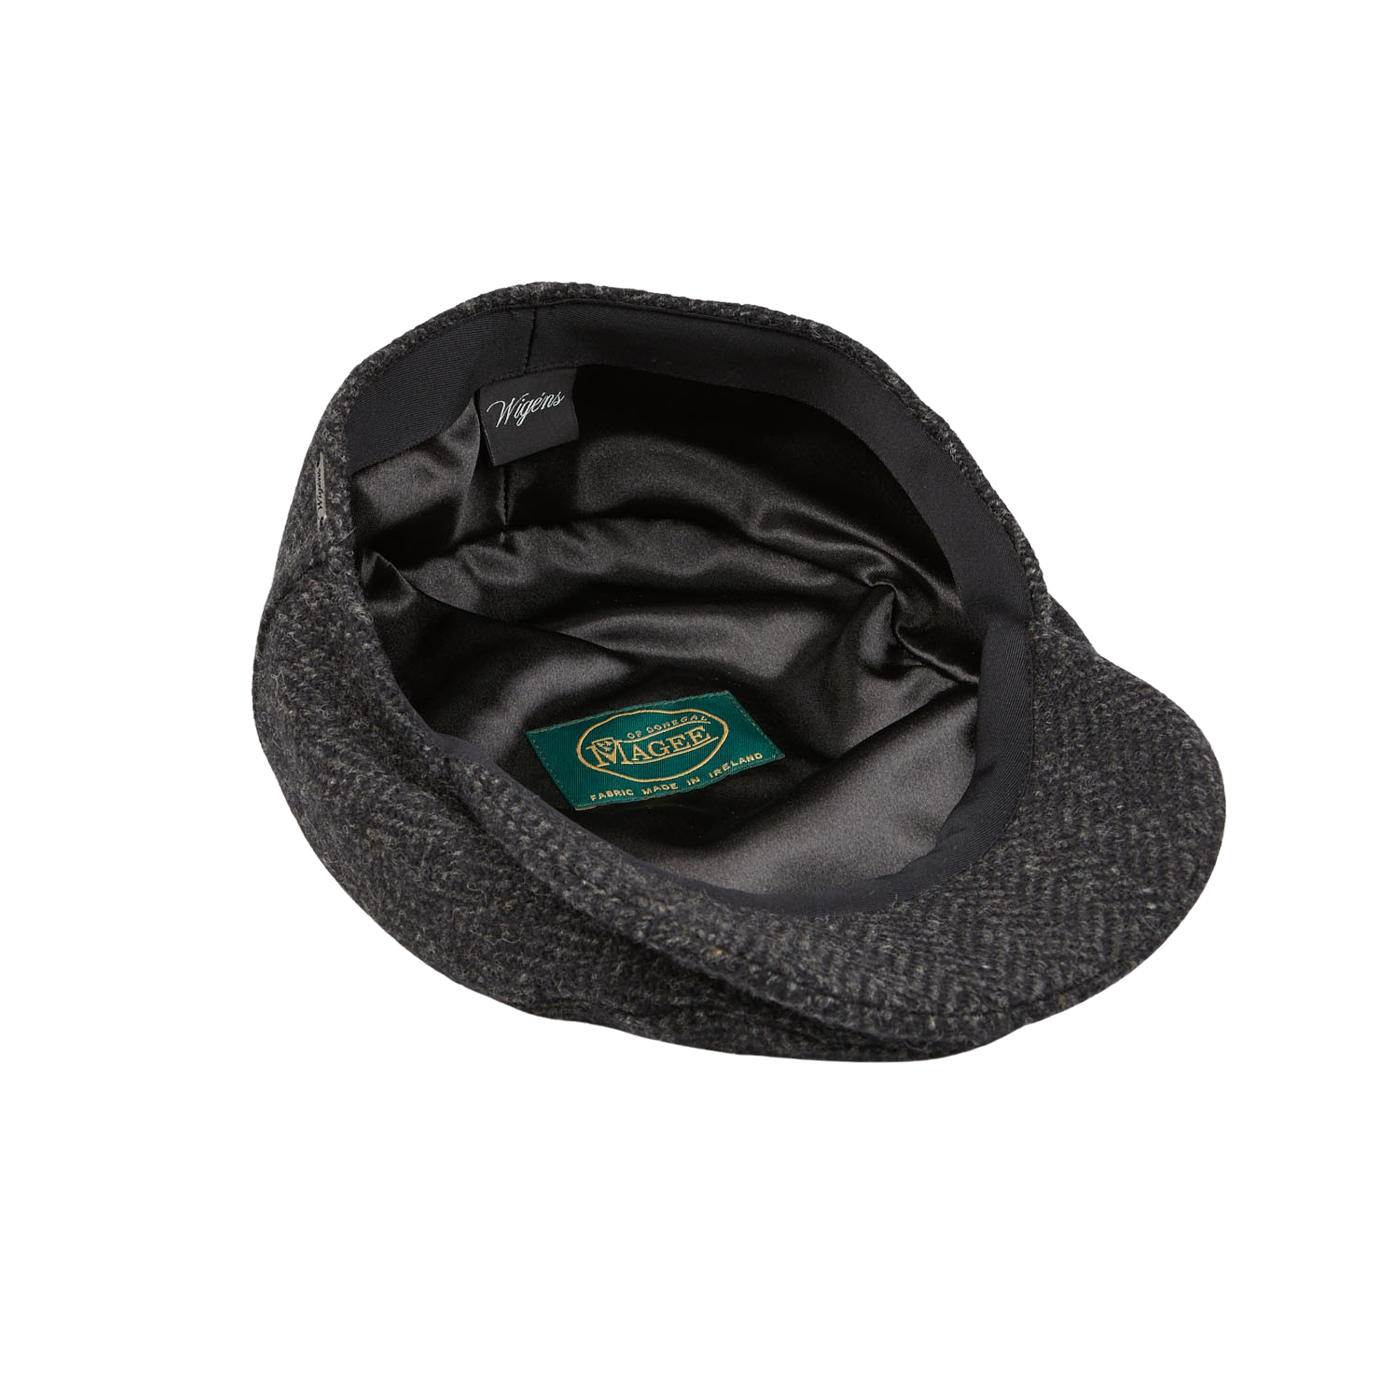 A black and green Wigéns cap with a label on it.